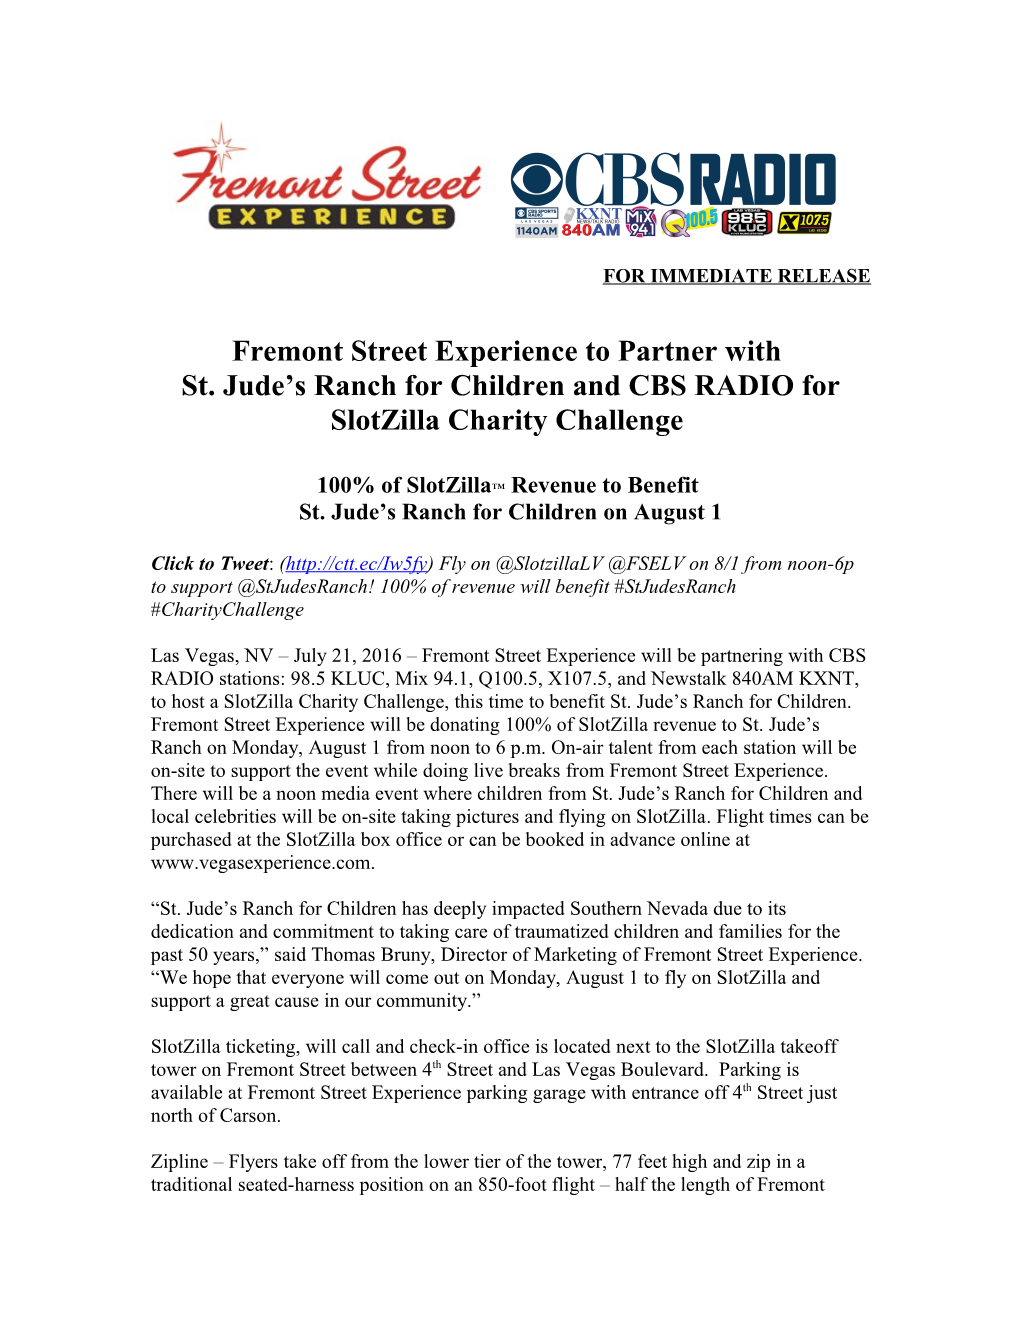 Fremont Street Experience to Partner With